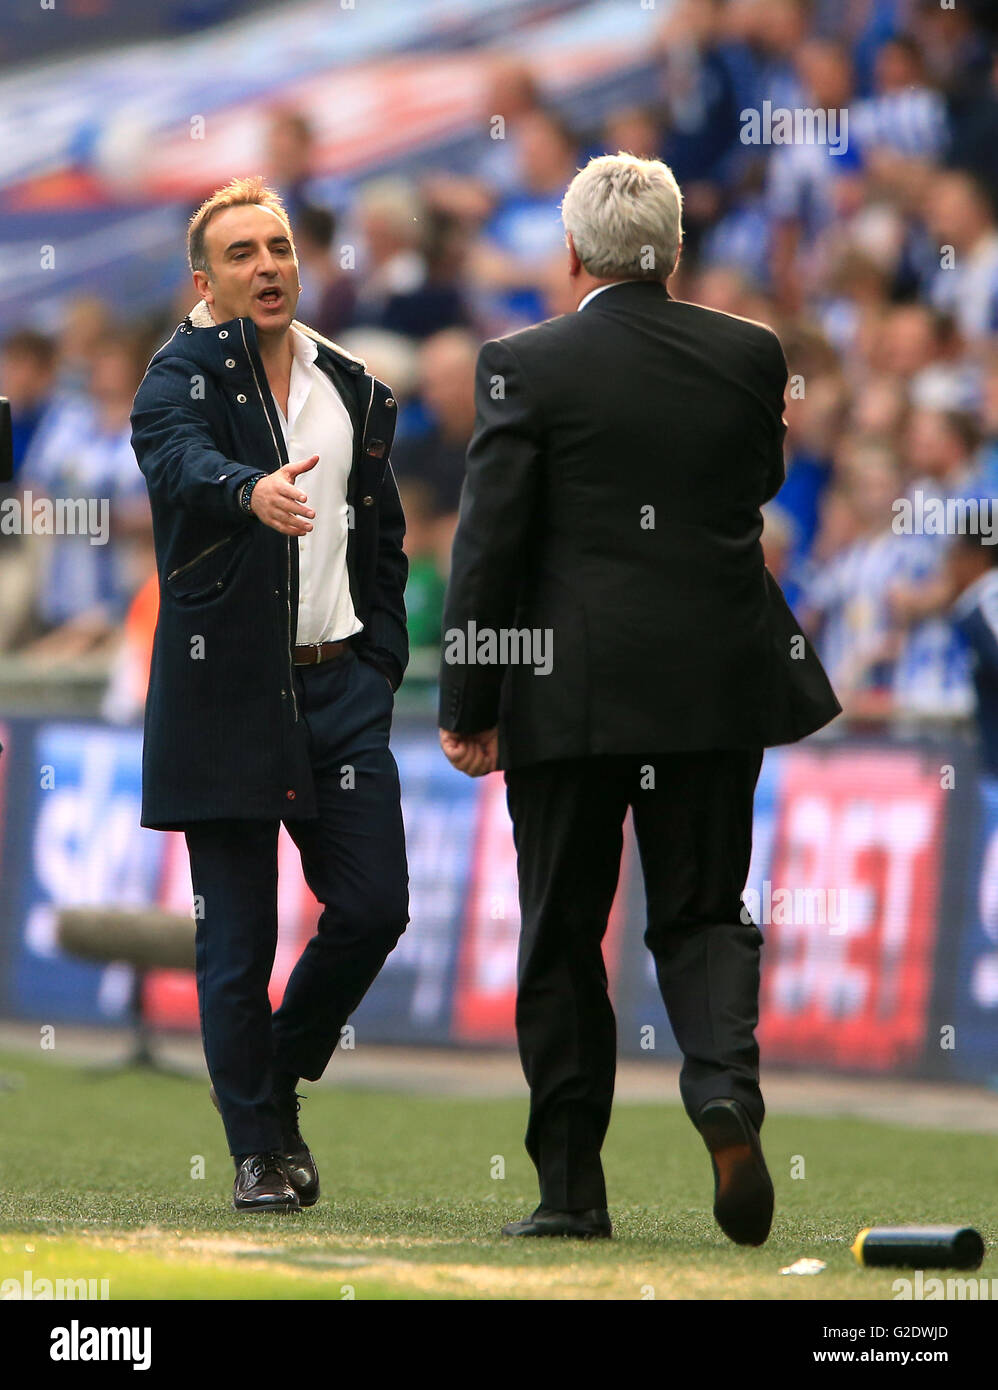 Sheffield Wednesday manager Carlos Carvalhal (left) shakes hands with Hull City manager Steve Bruce after the Championship Play-Off Final at Wembley Stadium, London. Stock Photo